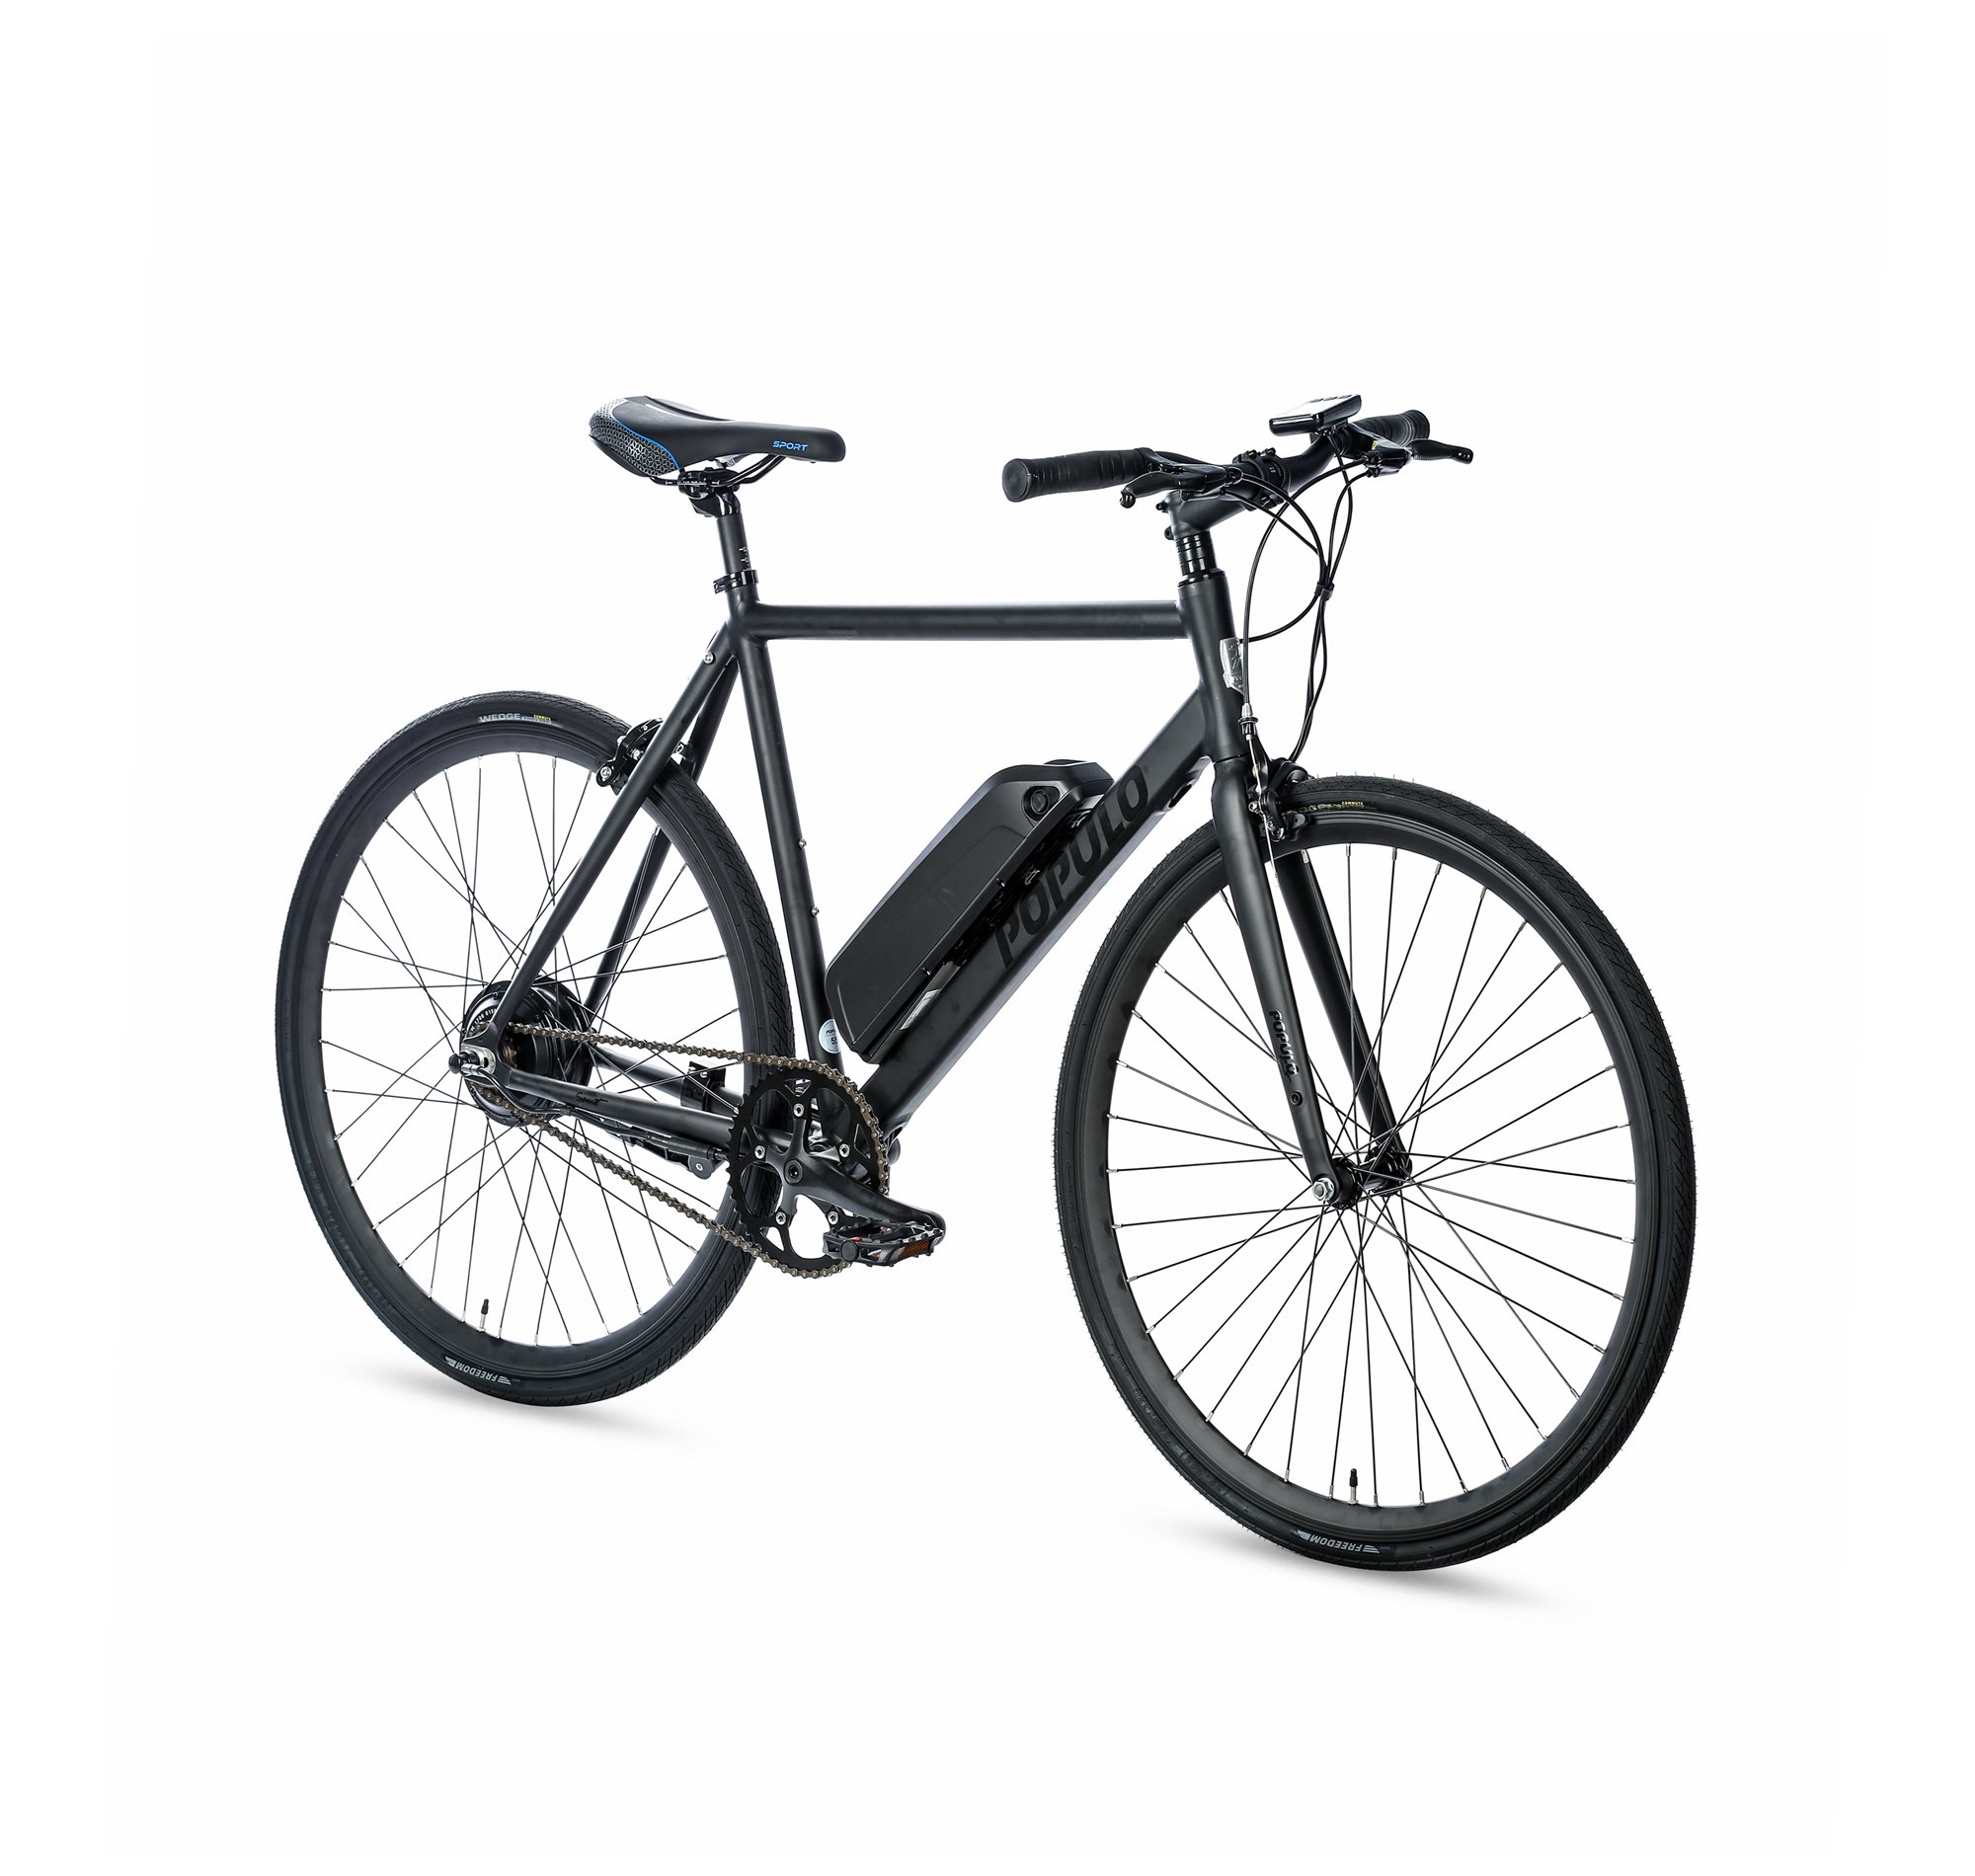 Populo Sport V3 Electric Bicycle - Populo Bikes